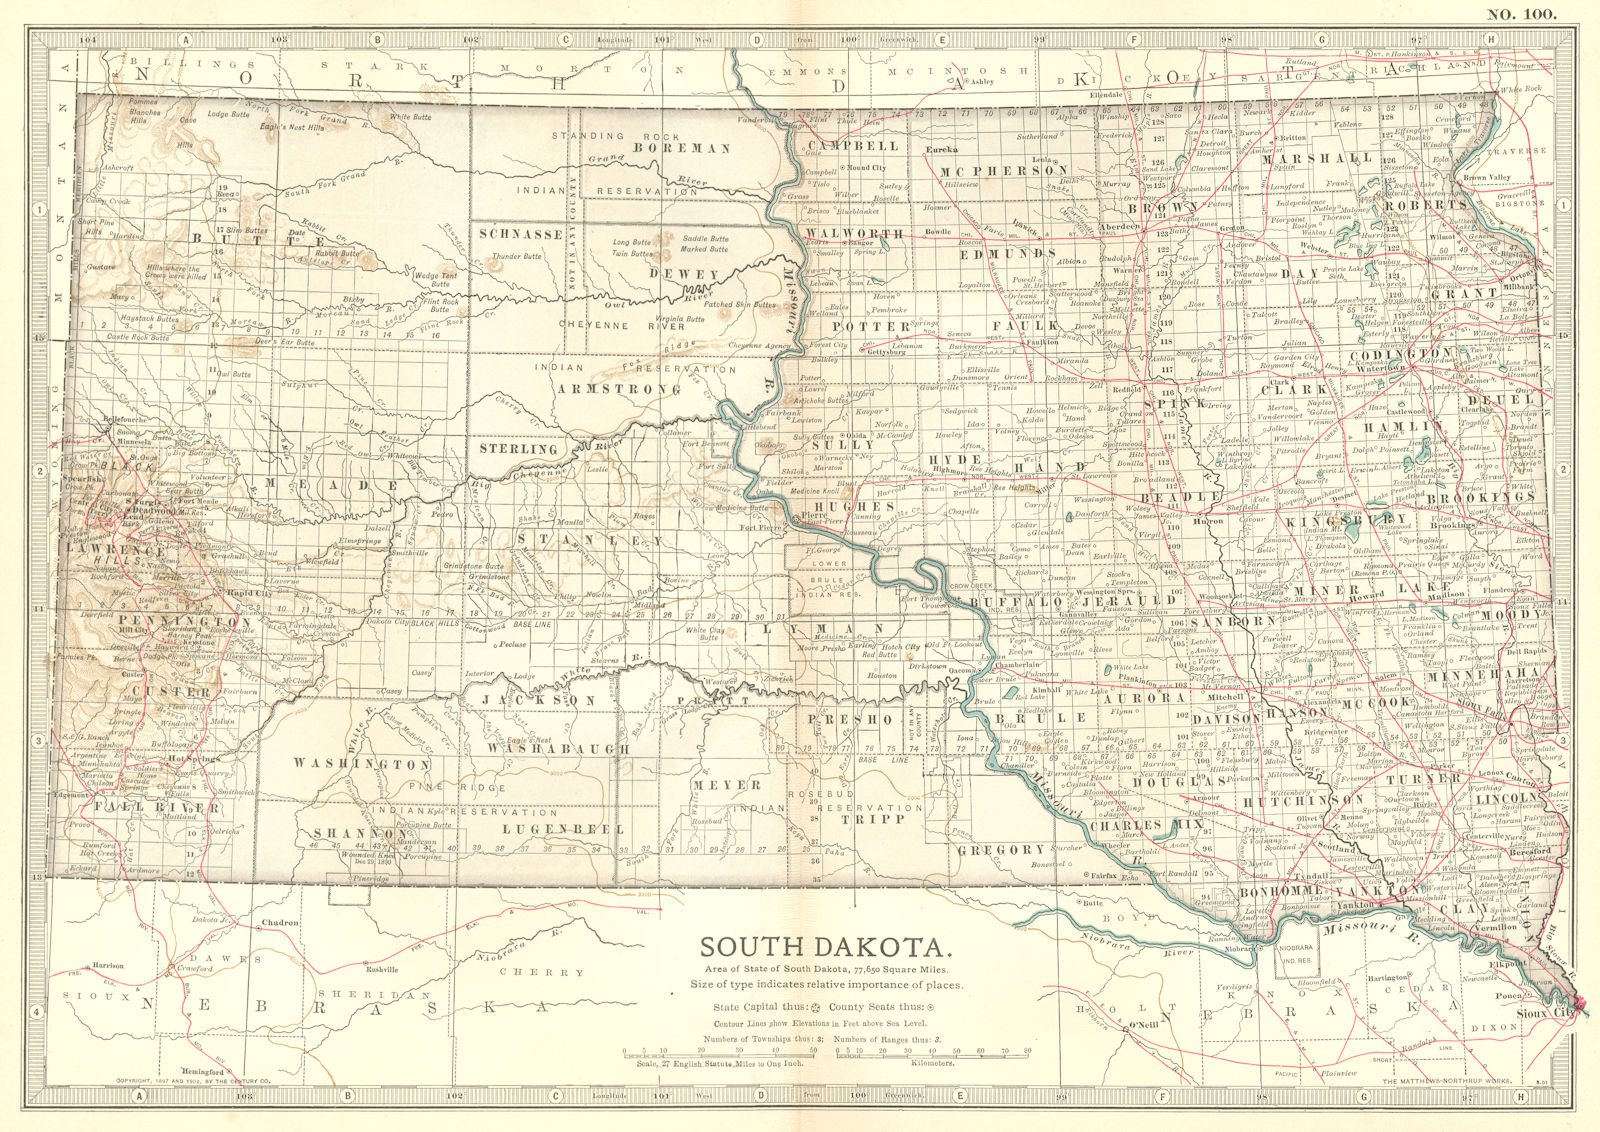 SOUTH DAKOTA. State map. Shows former counties & "not in any county" 1903